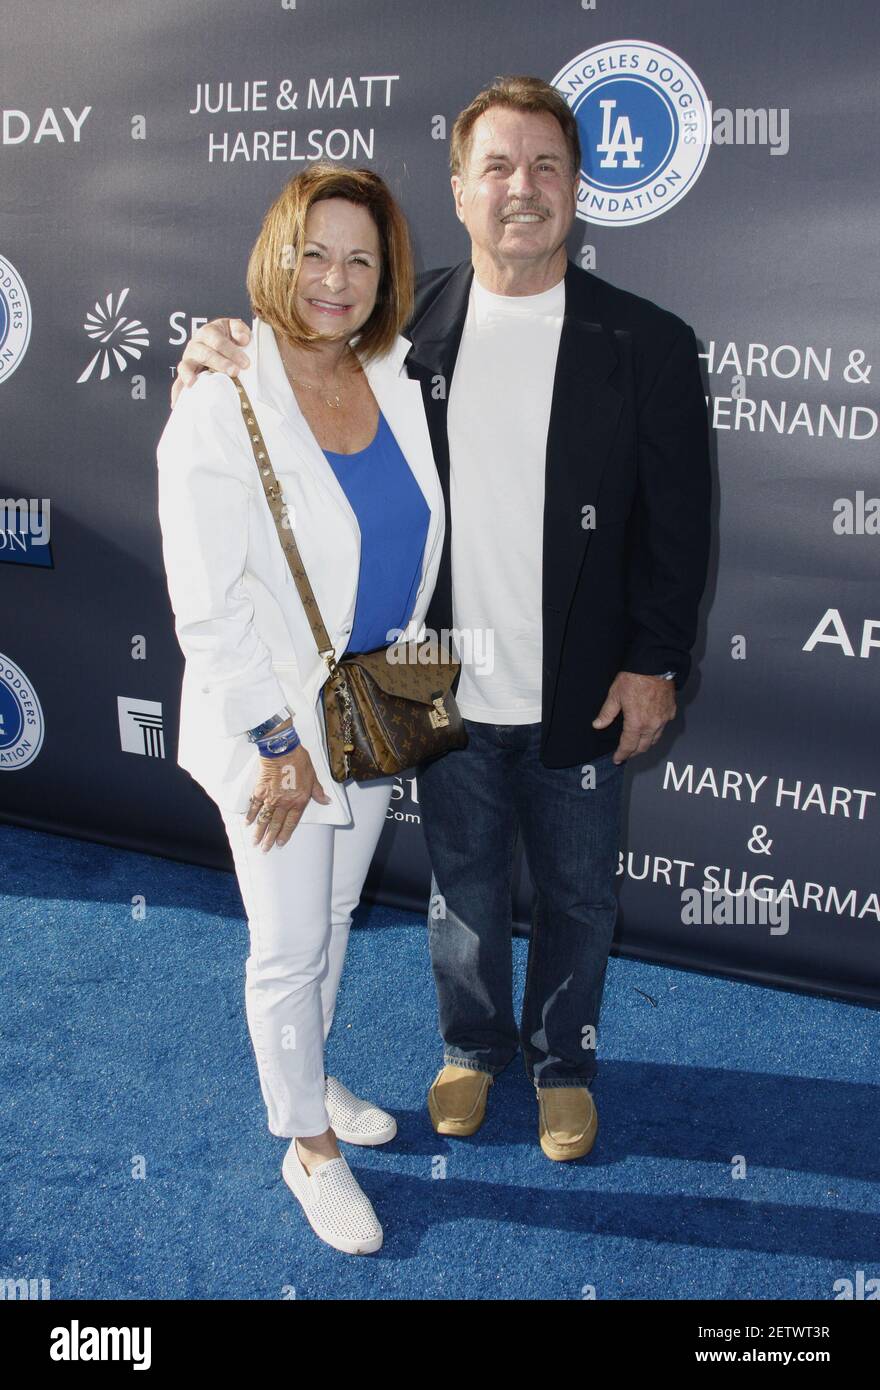 Former baseball player Ron Cey and Fran Cey attend Los Angeles Dodgers  Foundation's 3rd Annual Blue Diamond Gala at Dodger Stadium in Los Angeles,  CA on June 8, 2017. (Photo by CraSH/imageSPACE) ***